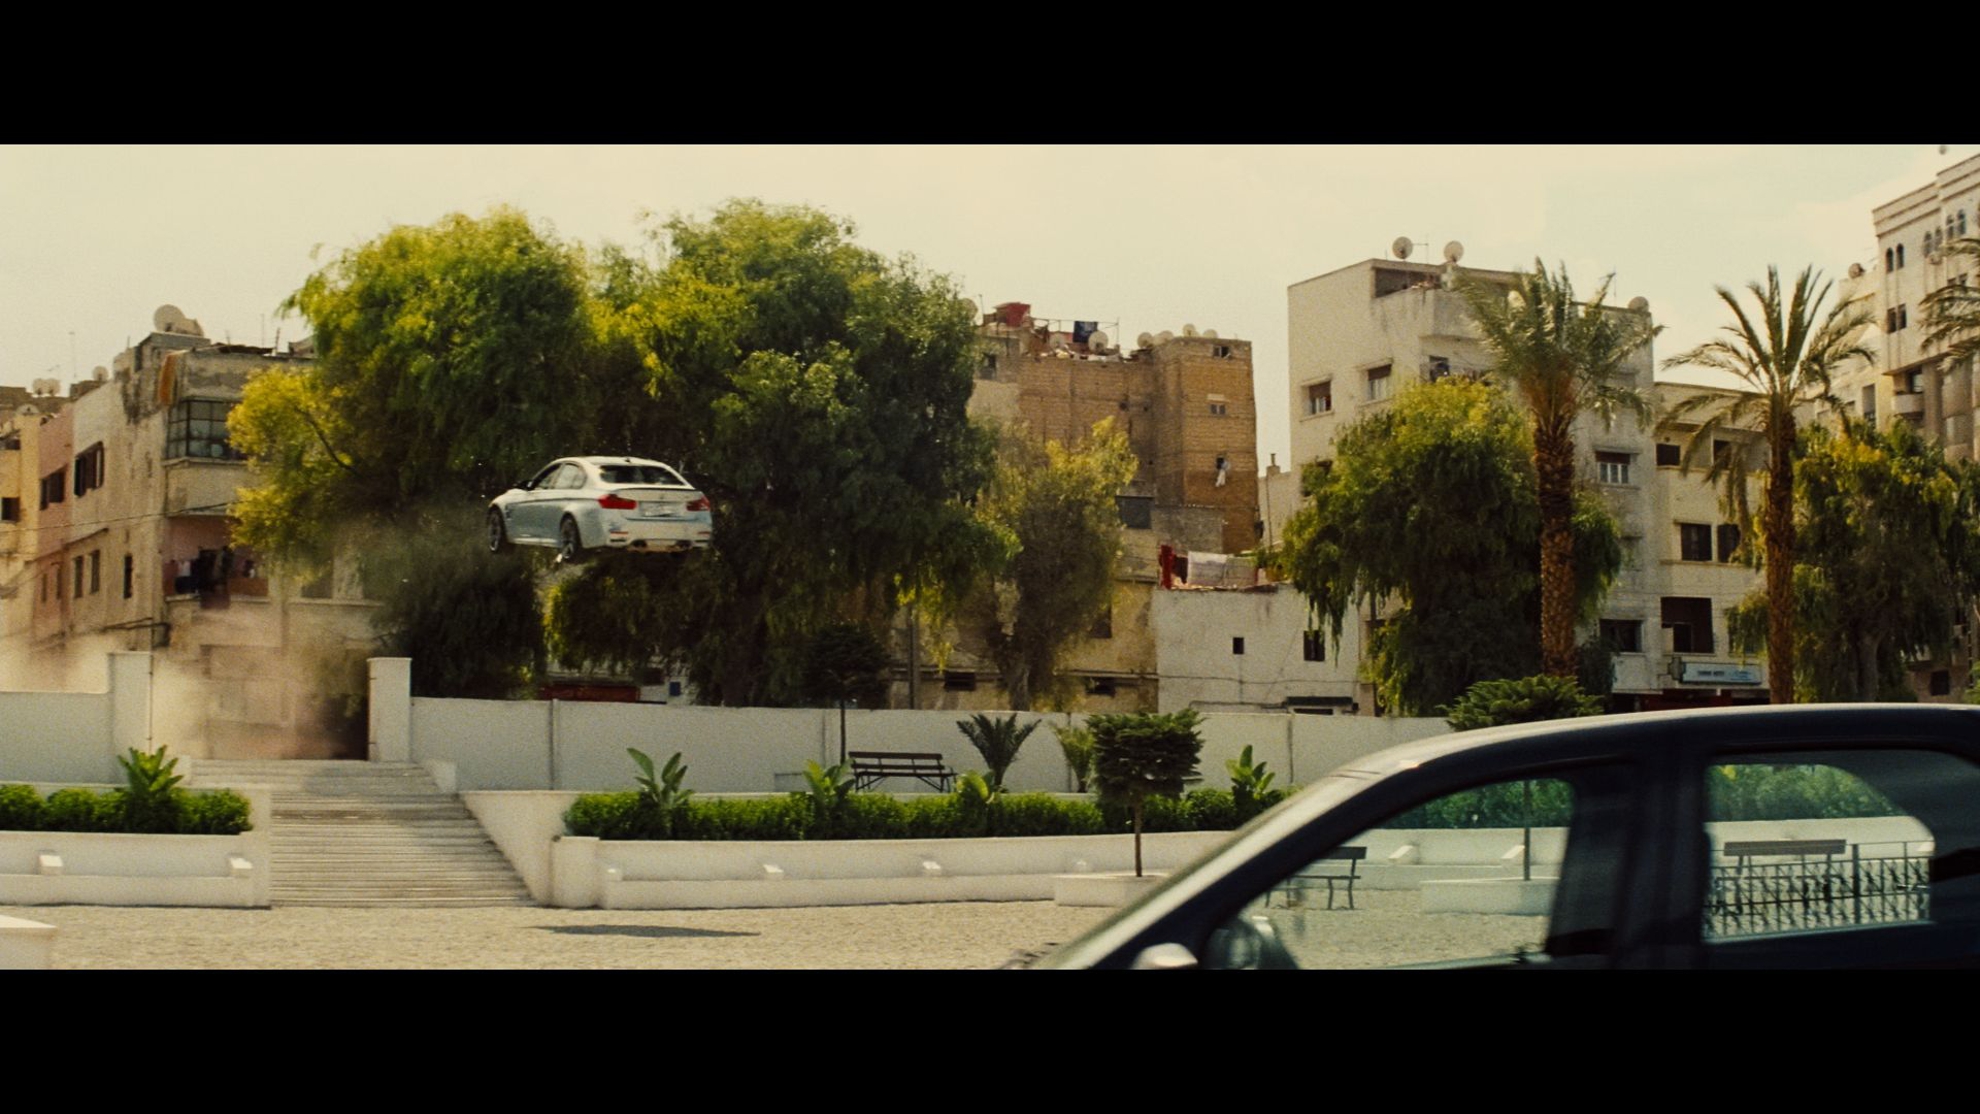 Mission: Impossible BMW High-speed, high-tech, high excitement